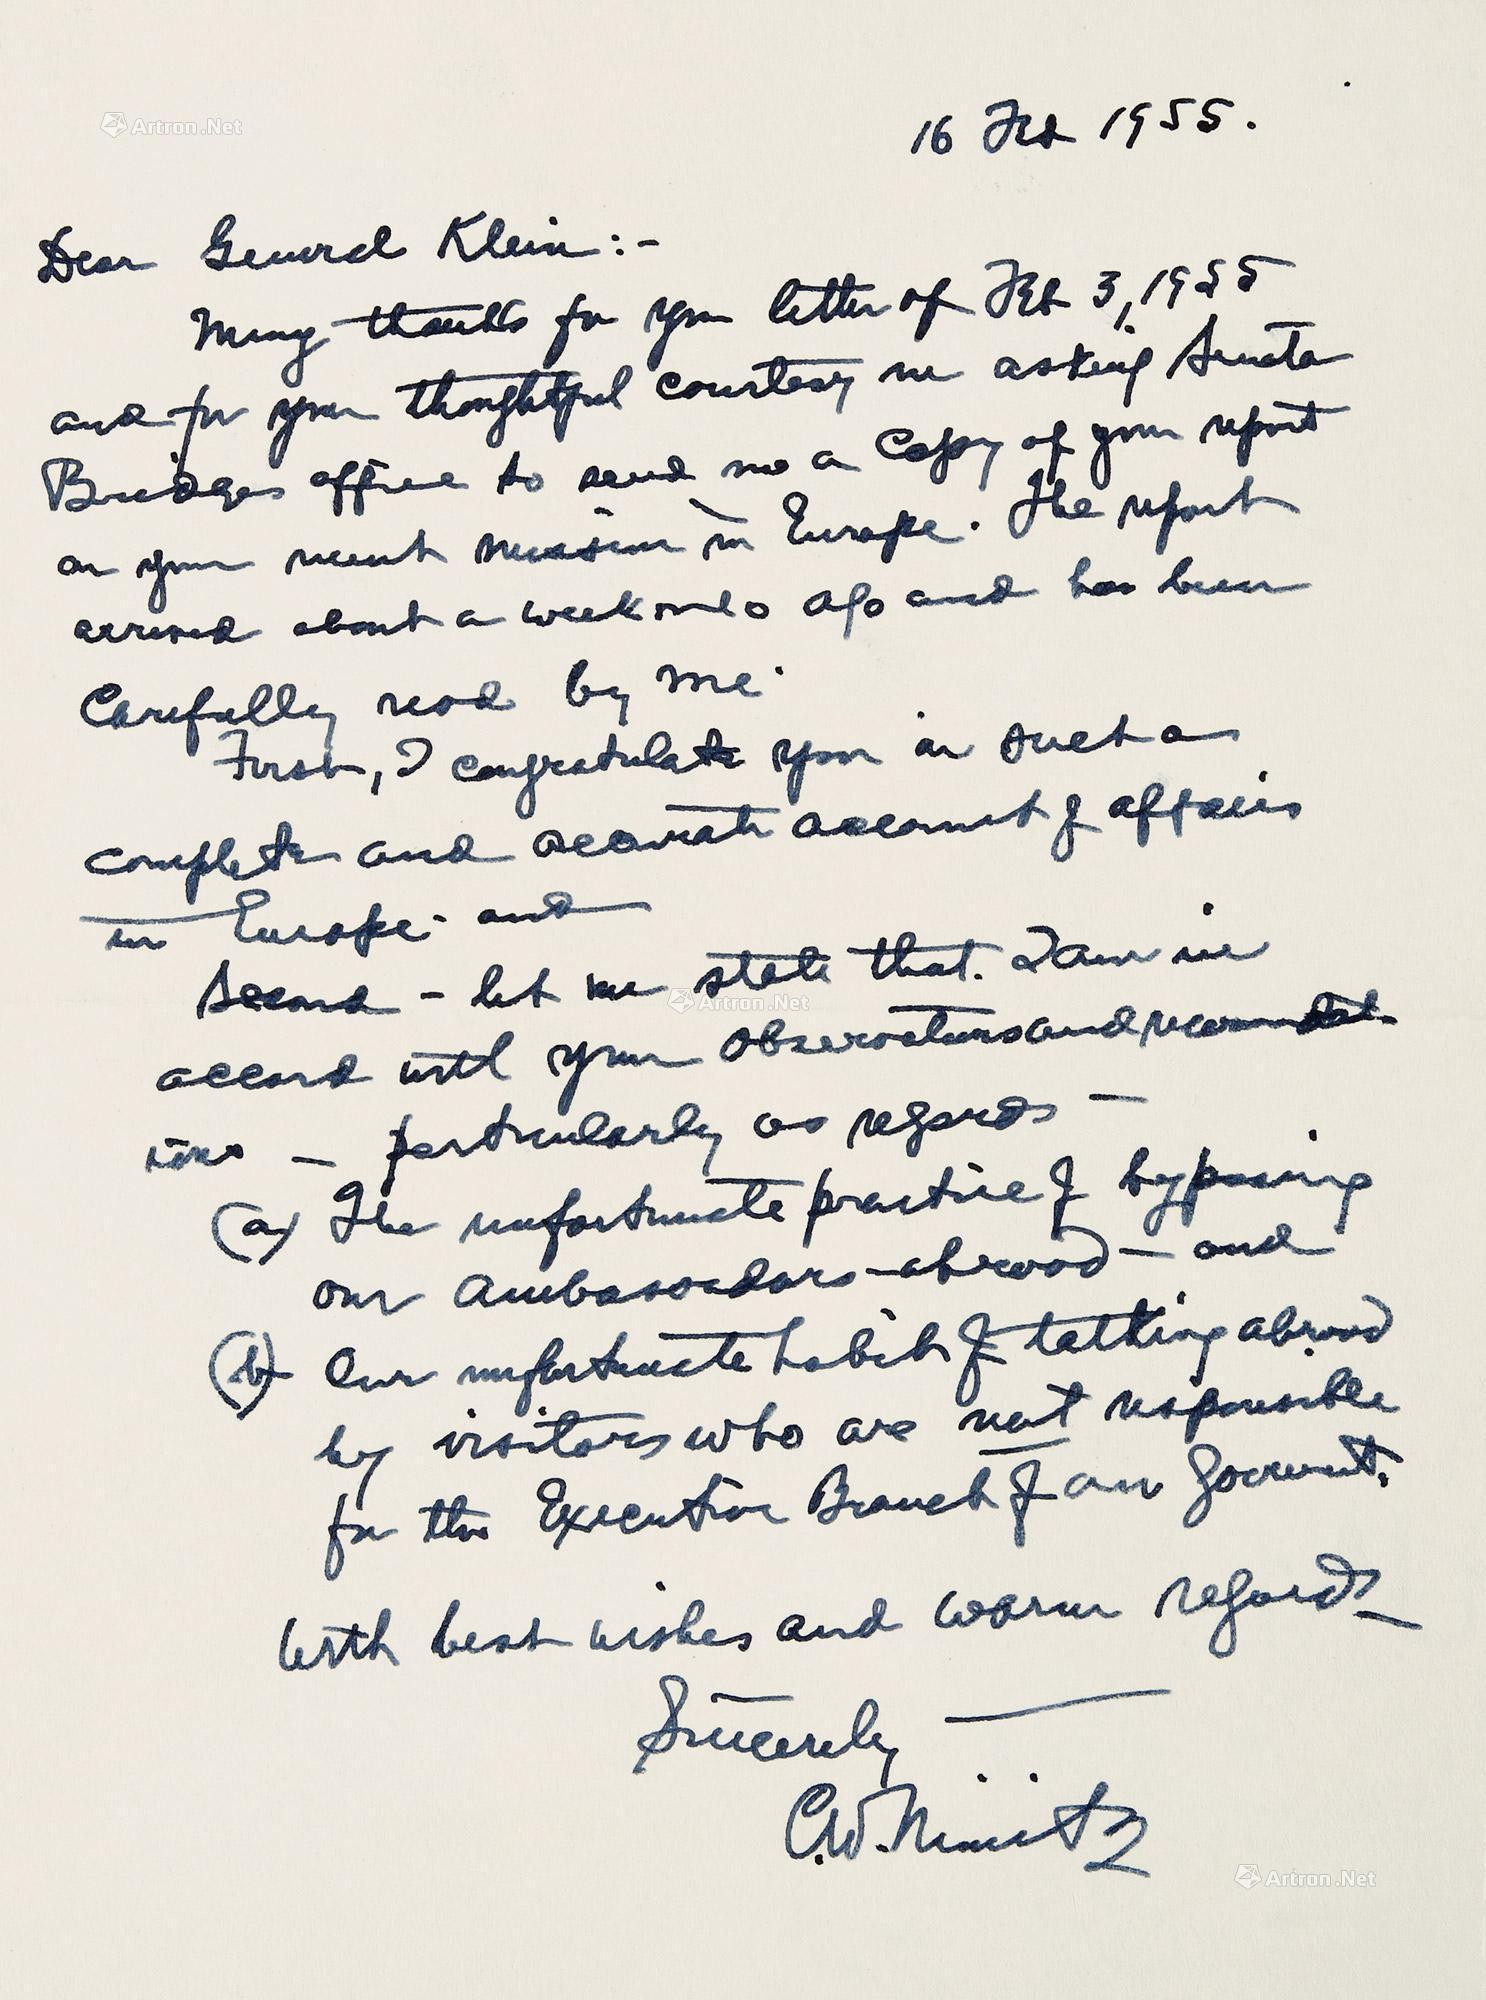 Autographed letter by Chester William Nimitz， the“Navy Five-Star Admiral of the United States”， with COA